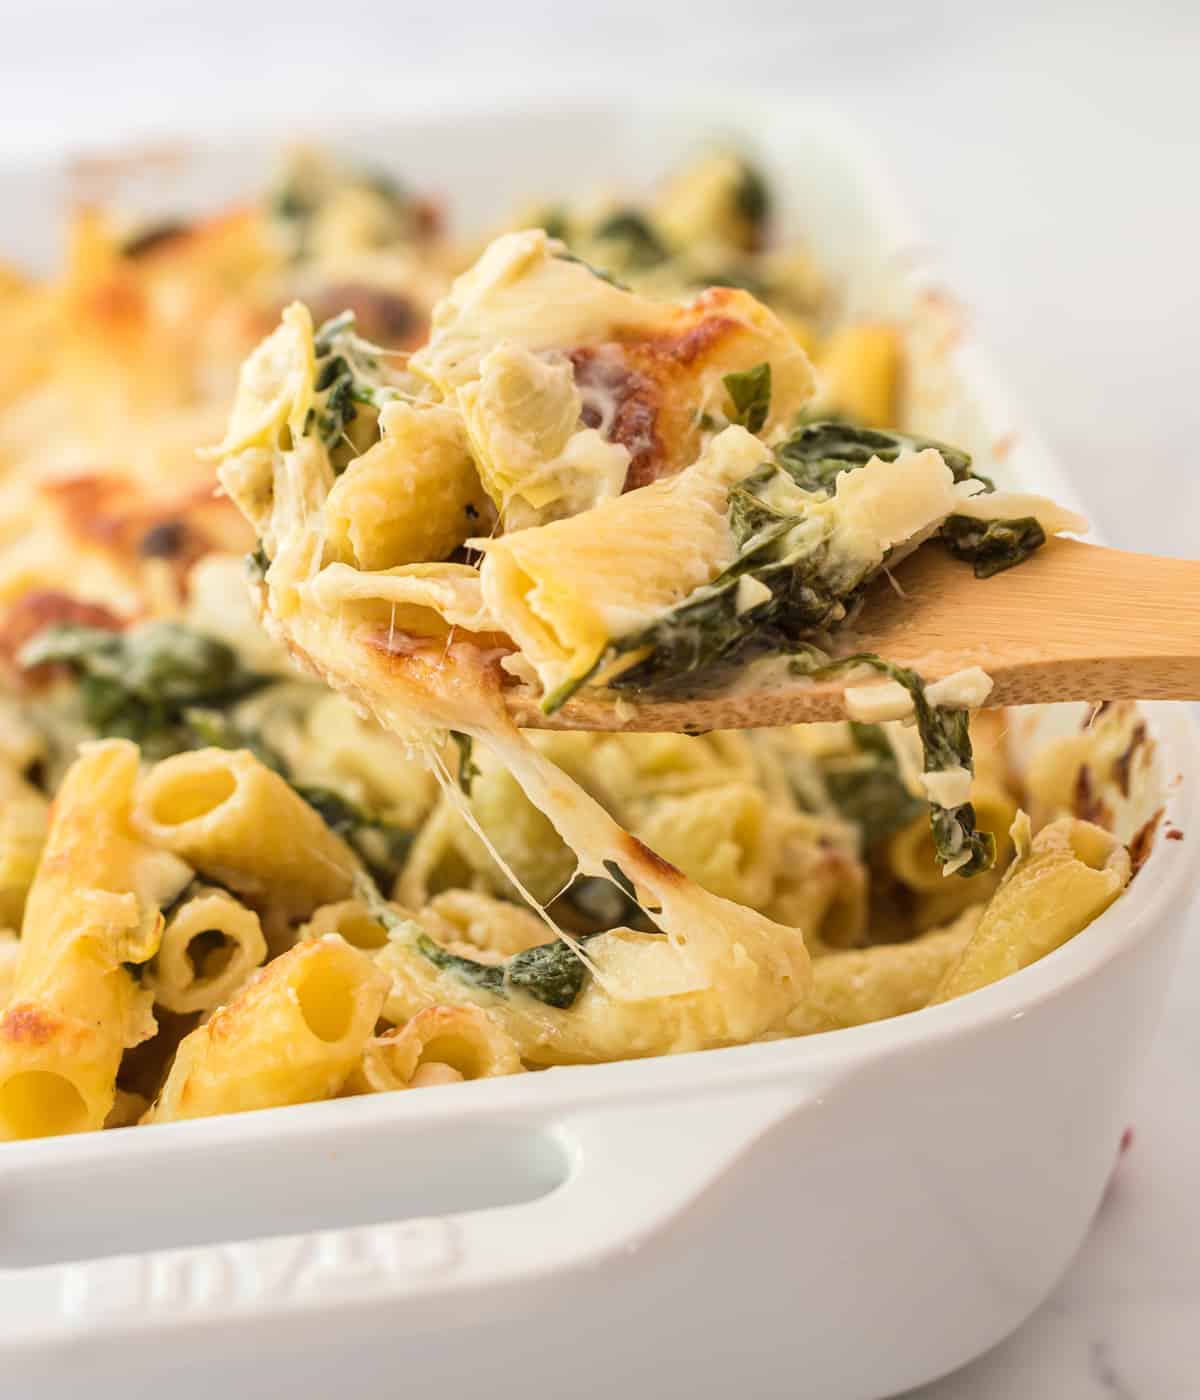 a wooden spoon taking a scoop of spinach artichoke pasta from the baking dish